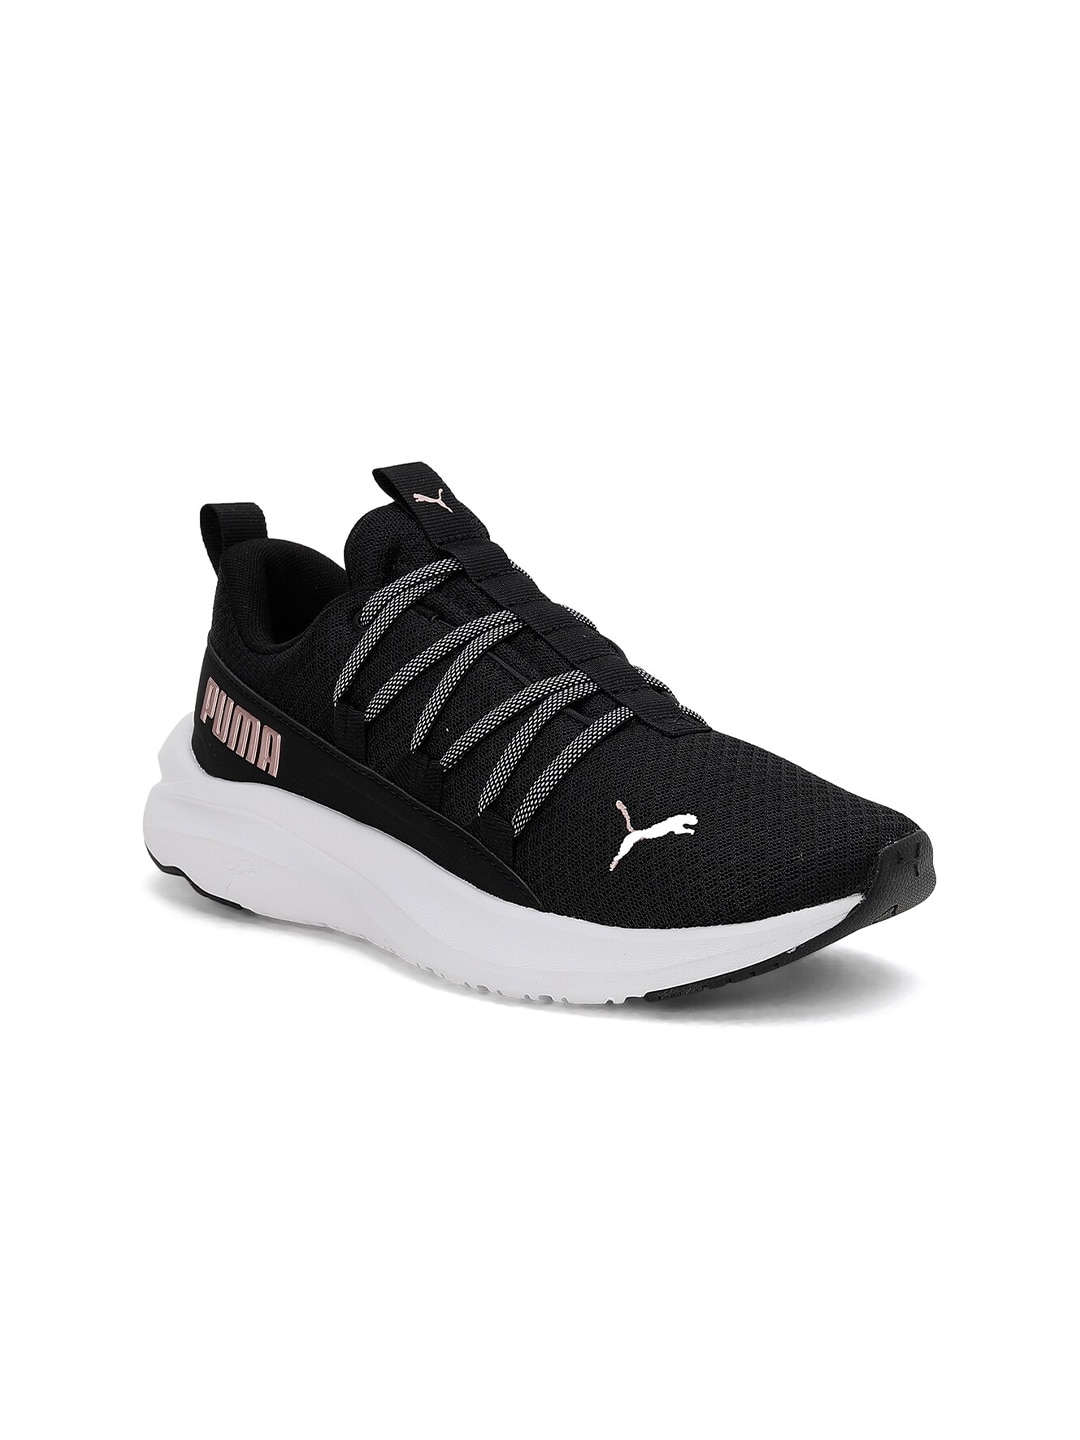 Puma Women Black Softride One4all Textile Walking Shoes Price in India